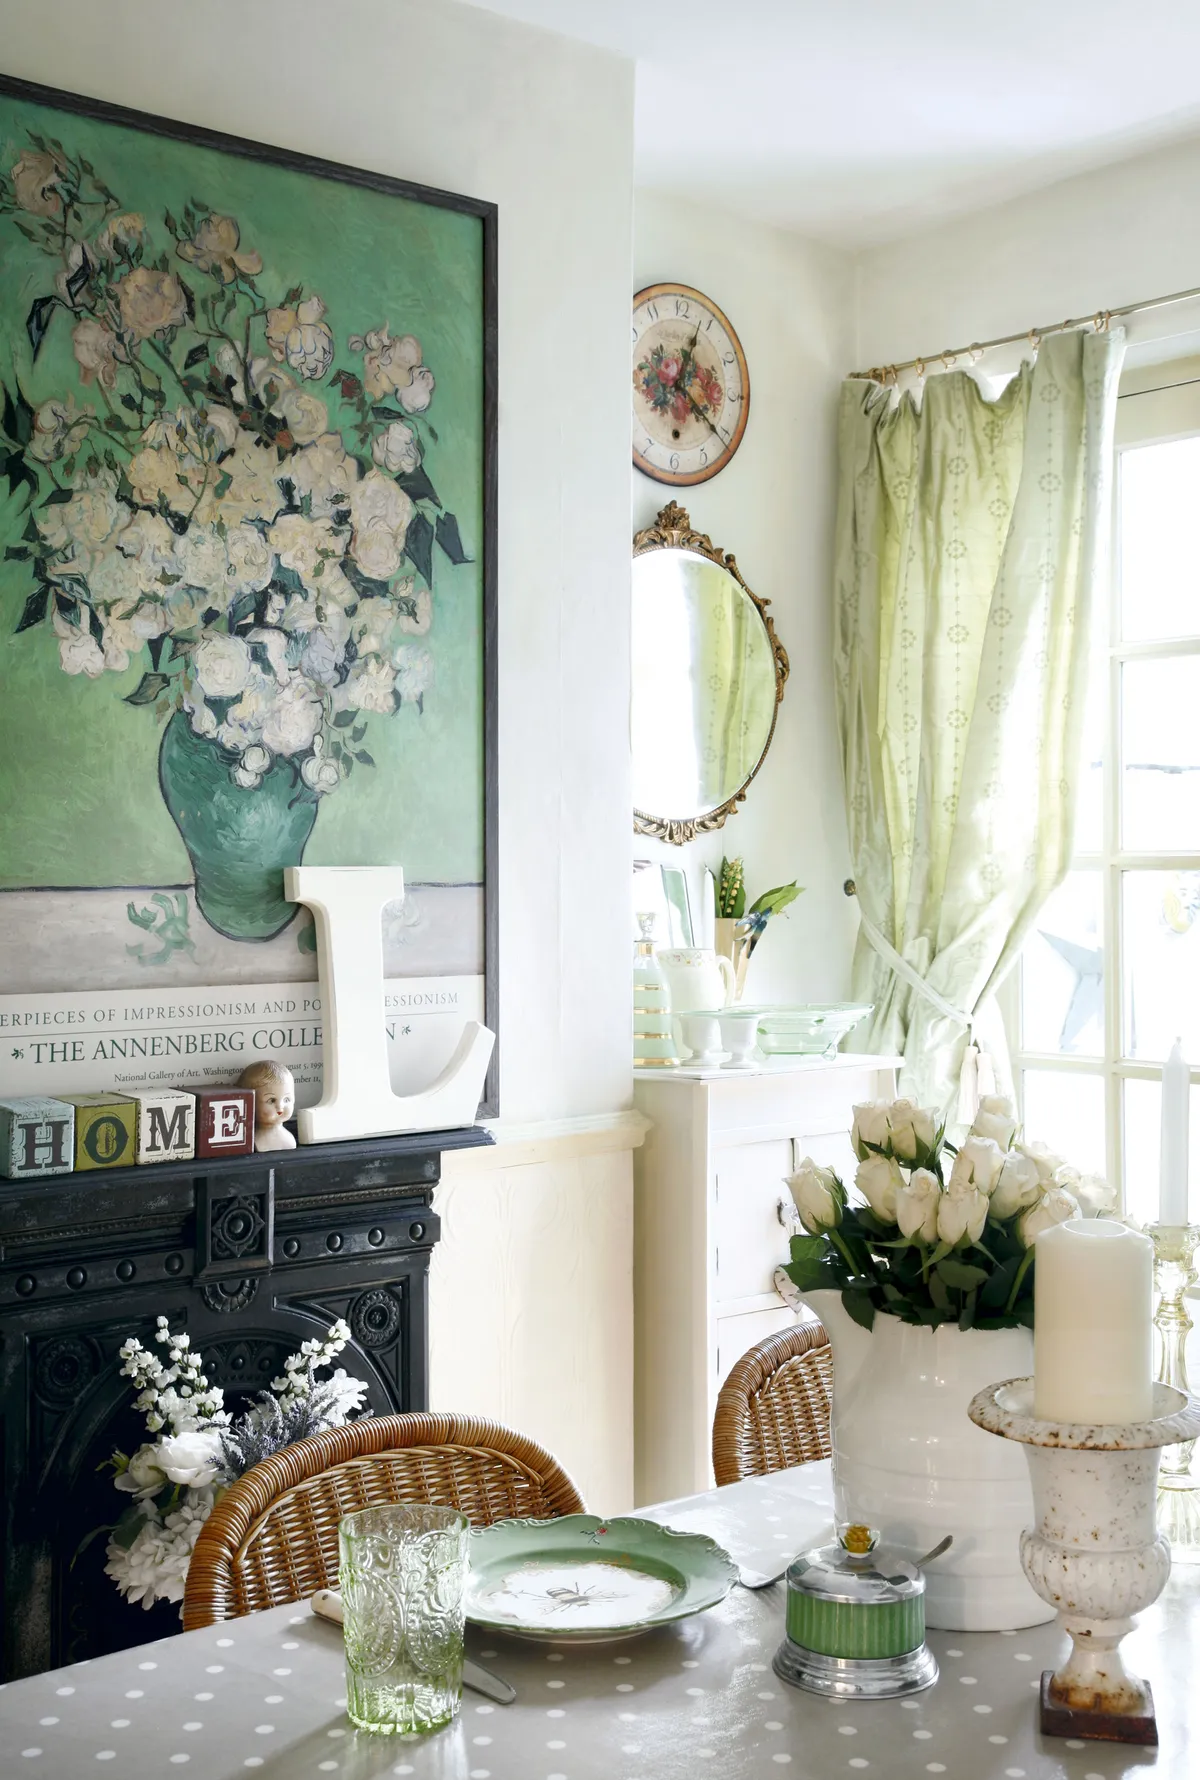 Being a huge fan of pastel green and white, Louise selected this gentle colour scheme for her kitchen-diner